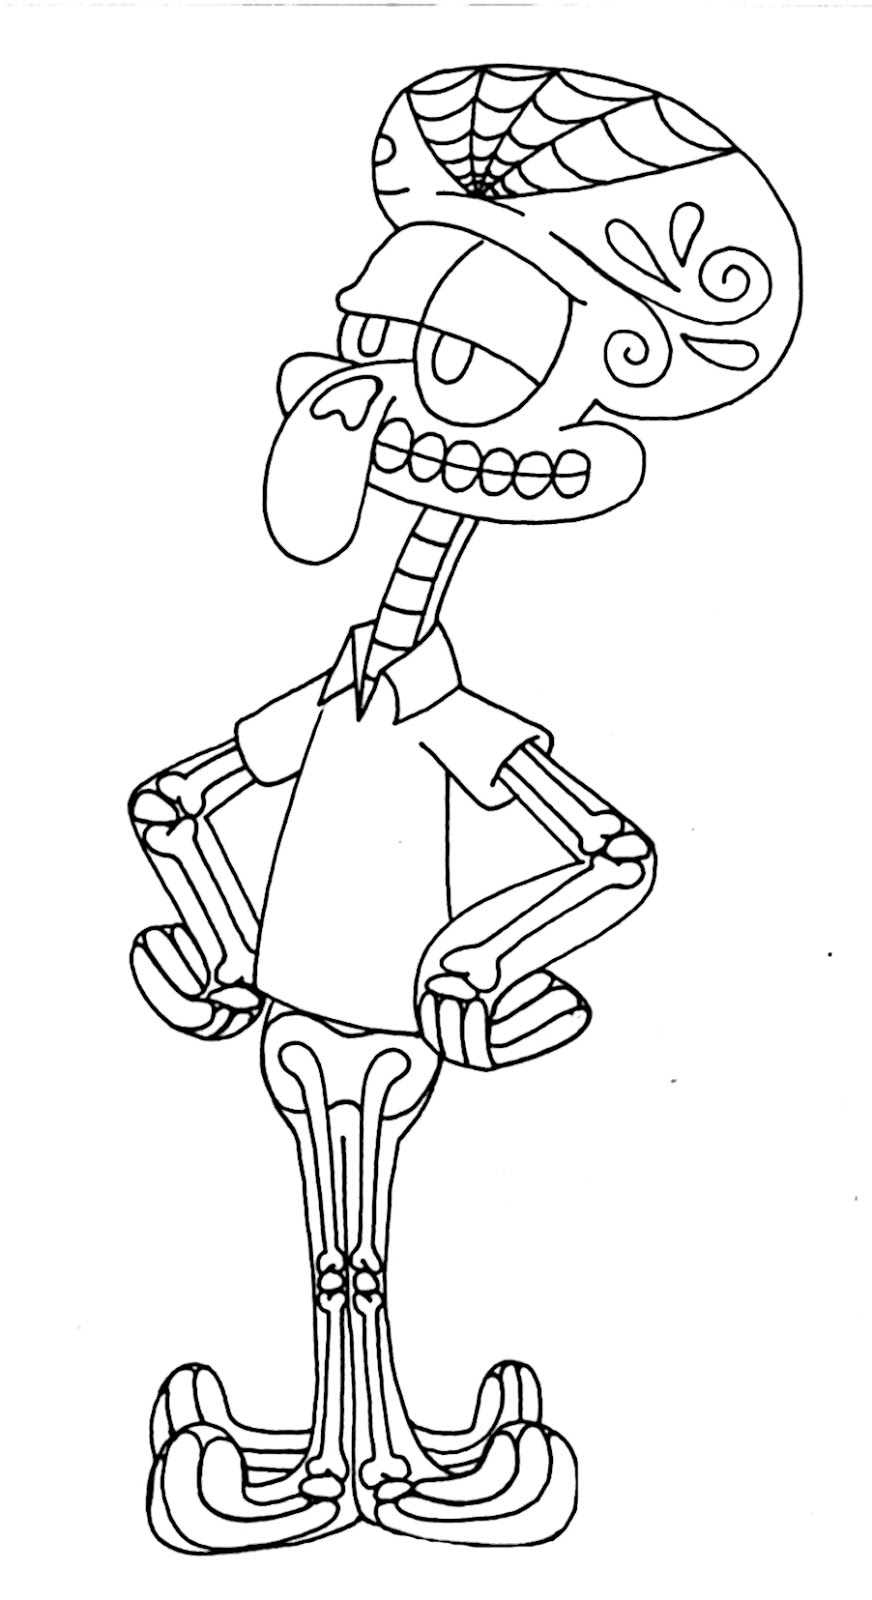 Yucca Flats, N.M.: Wenchkin's Coloring Pages - Skele-Squidward